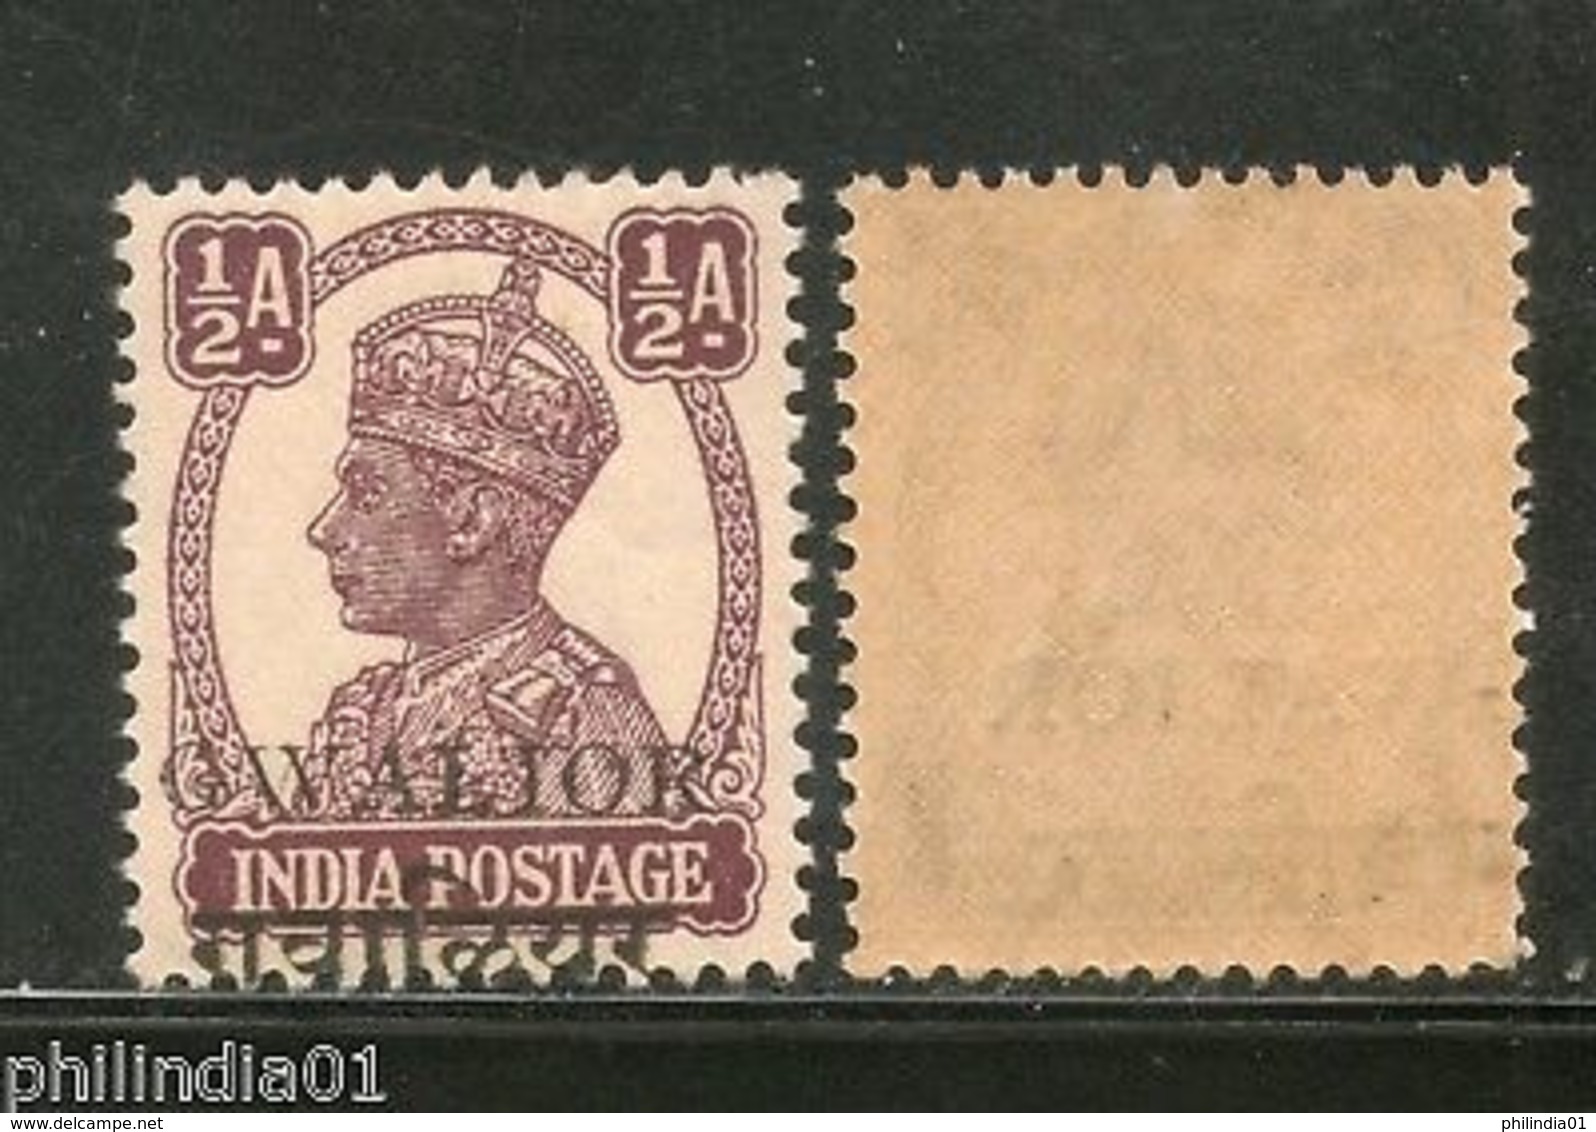 India Gwalior State KG VI �An Postage SG 130 / Sc 119 Aliza Press Ovpt Cat�5 MNH - Gwalior